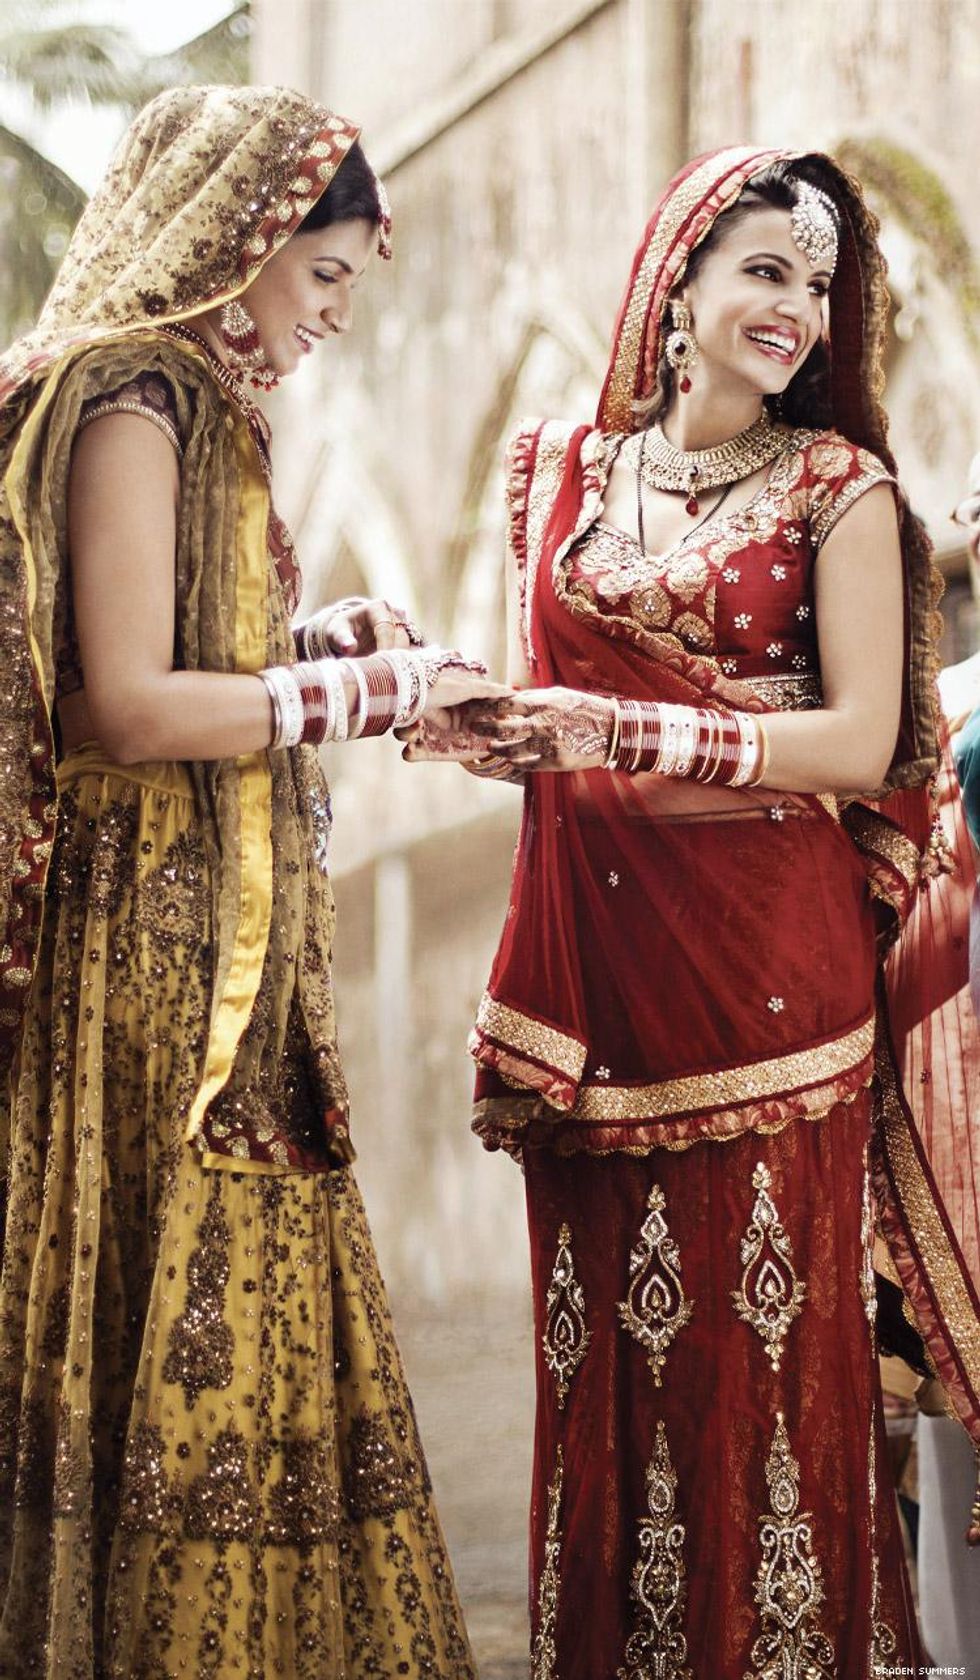 Two women wed in India by Braden Summers